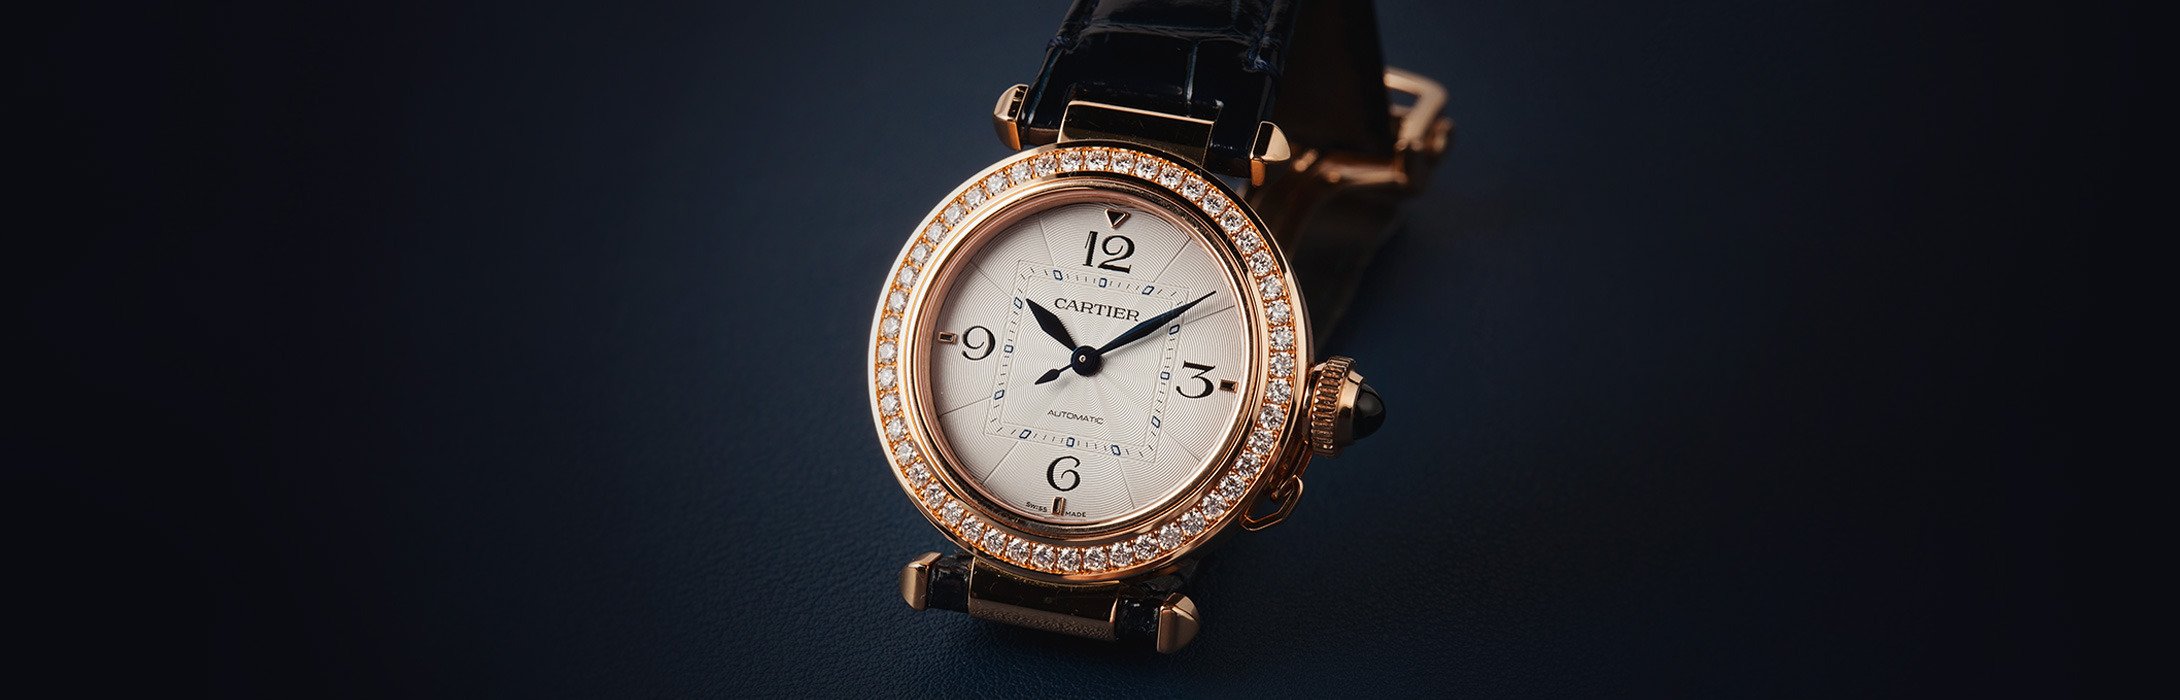 Things You May Not Know About Cartier